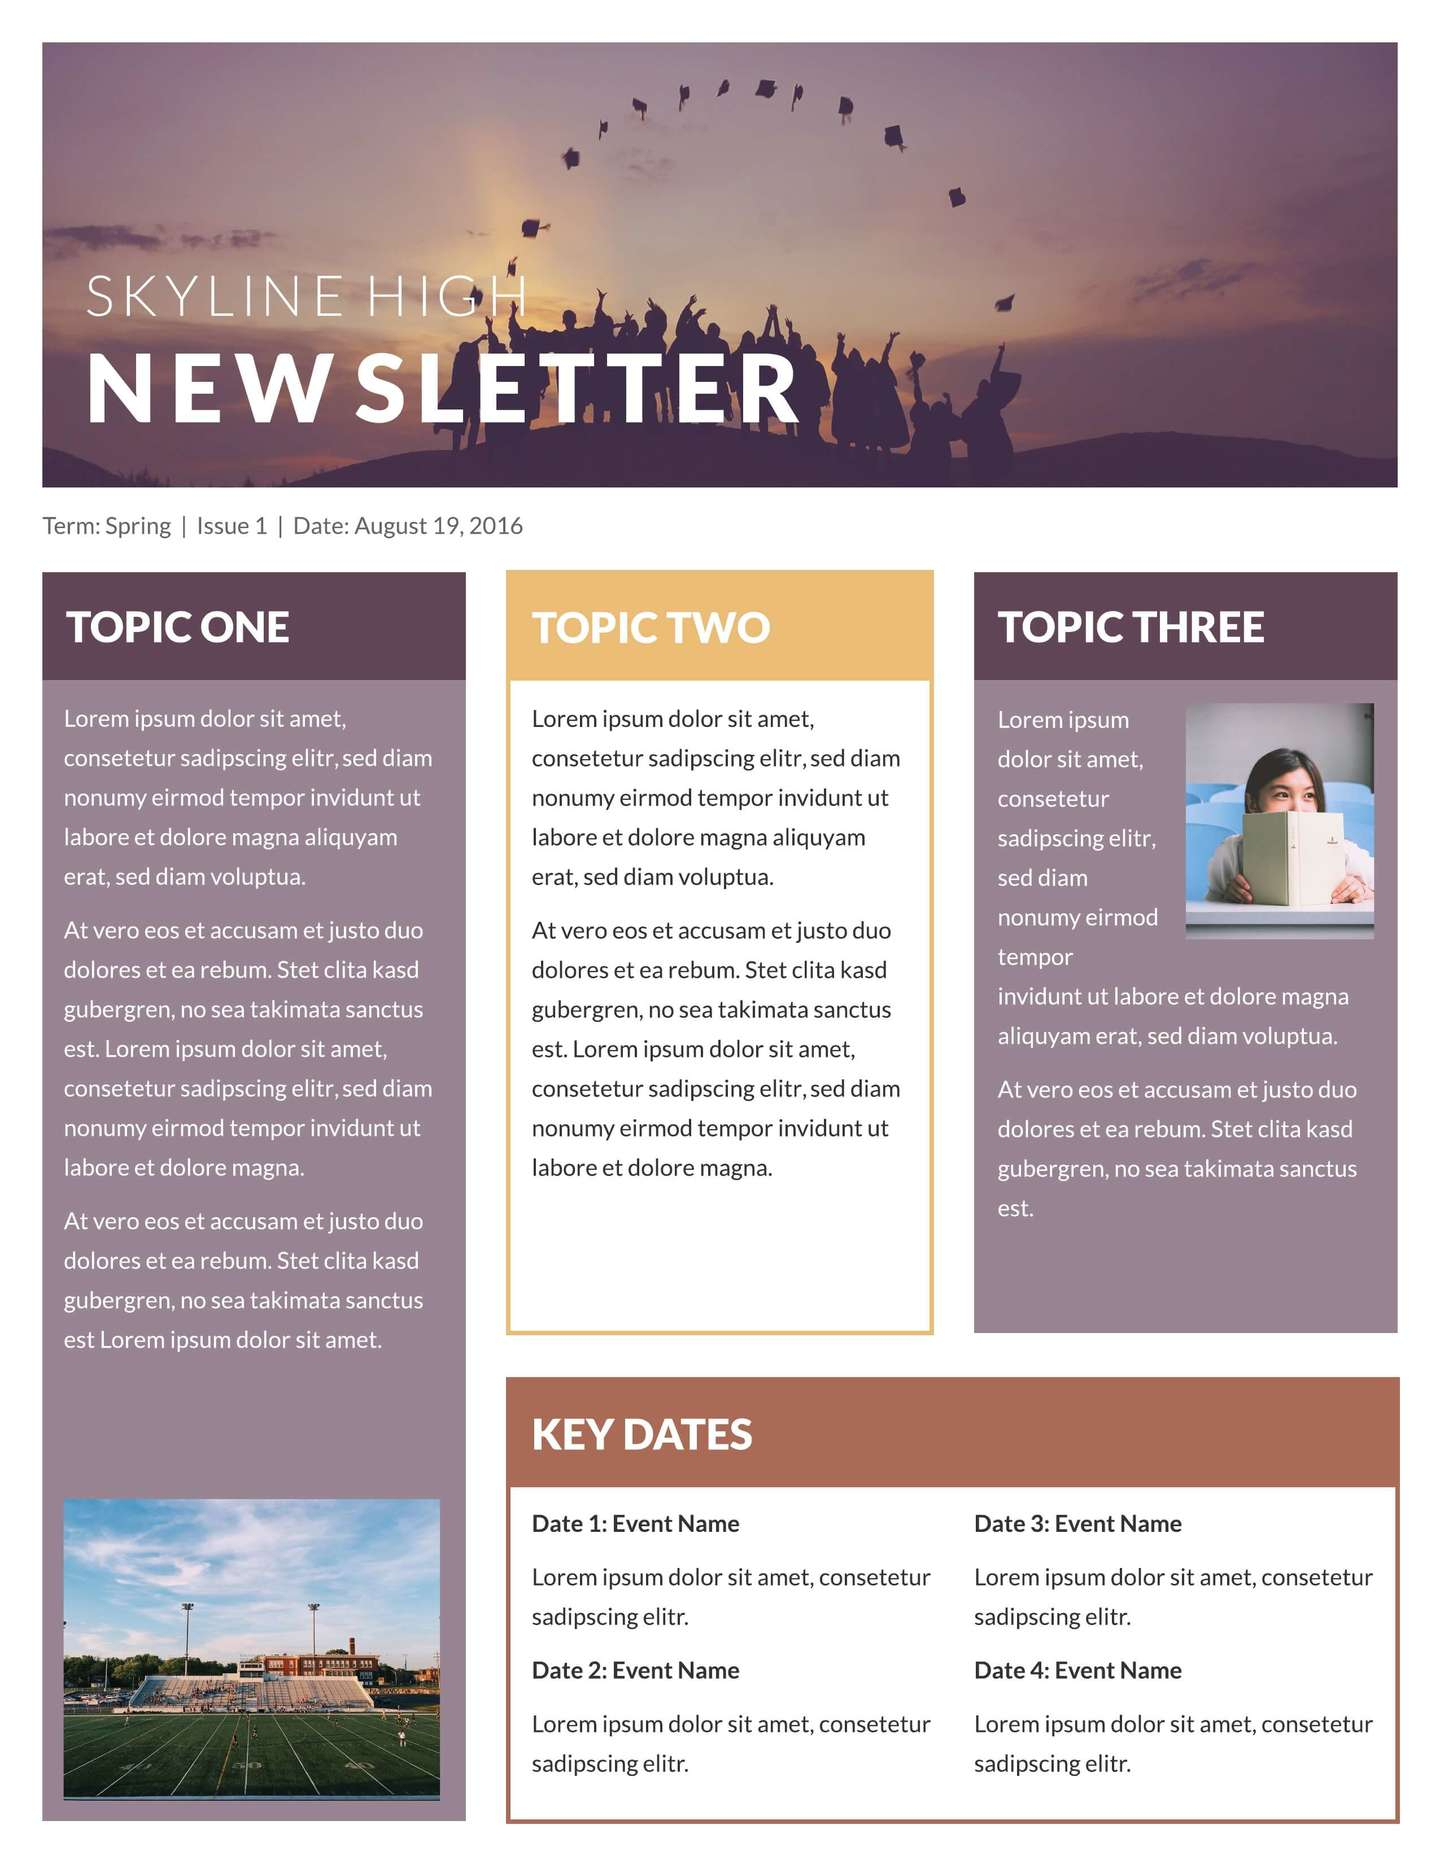 Free Printable Newsletter Templates & Examples | Lucidpress Intended For Newletter Templates